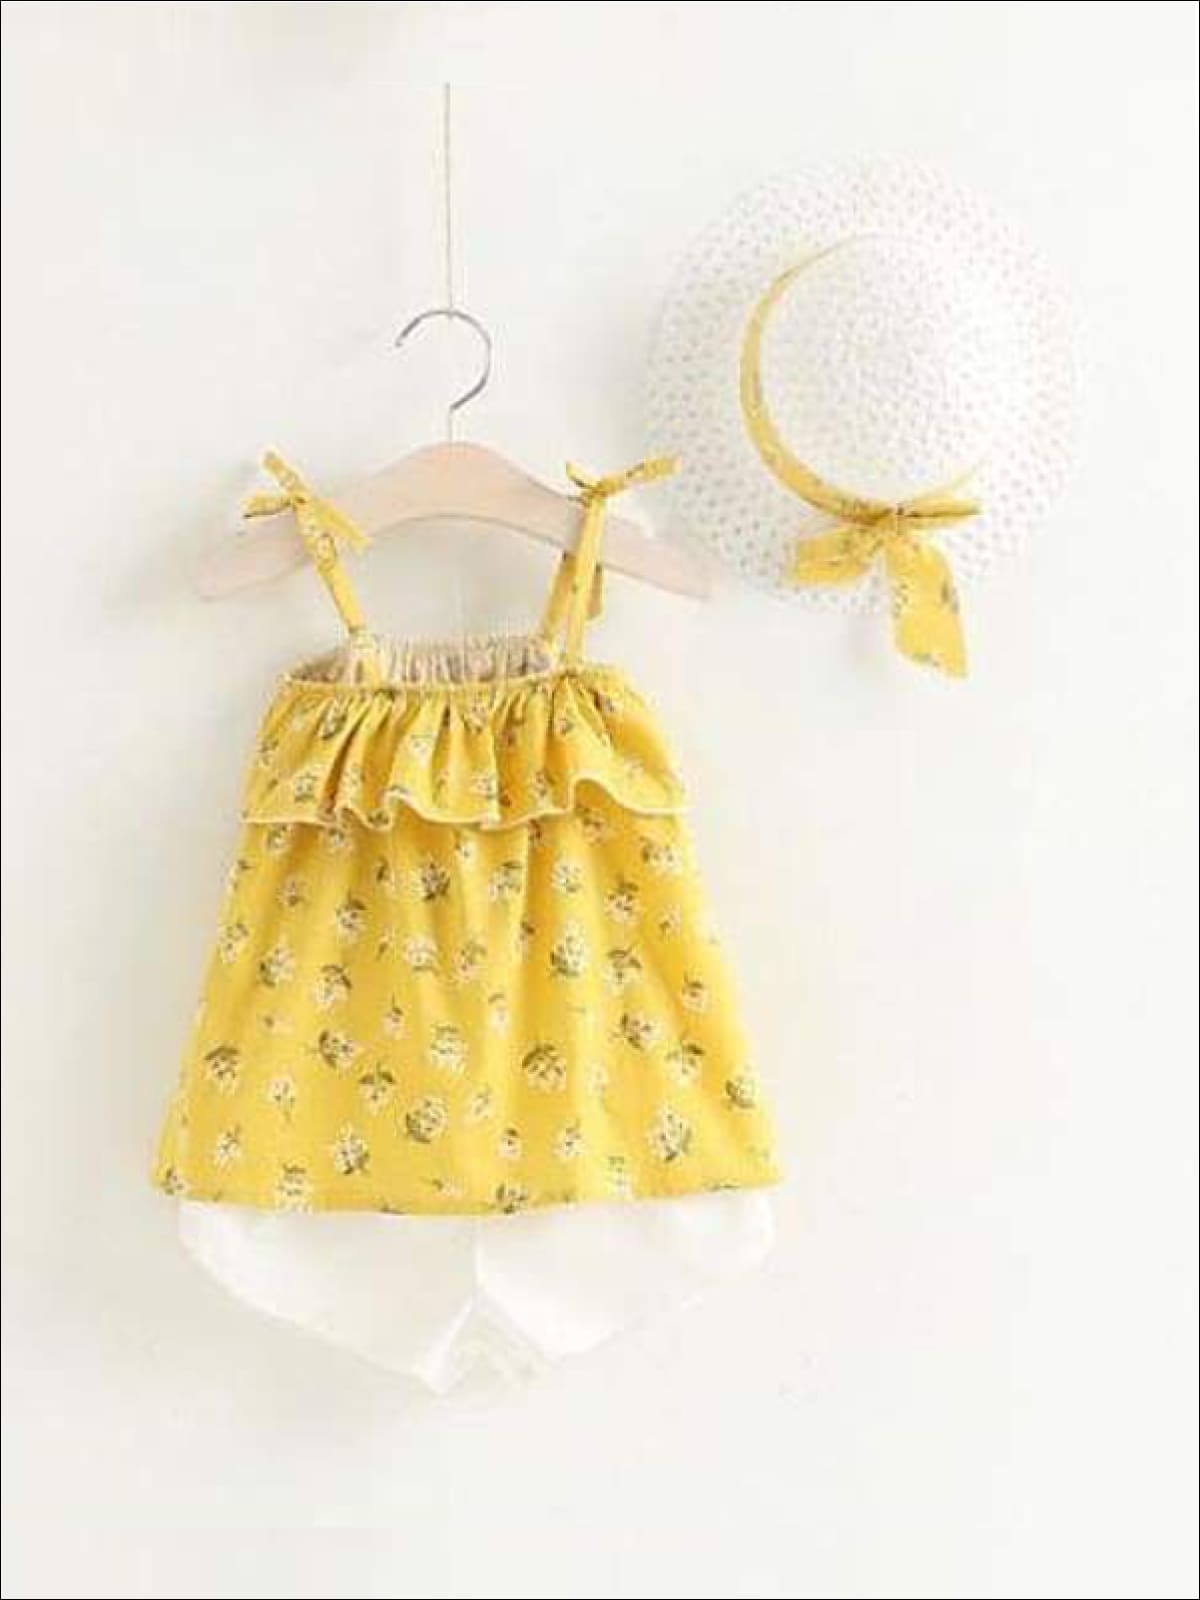 Girls Sleeveless Floral Print Tunic & White Shorts Set with Matching Sun Hat - Yellow / 2T - Casual Spring Set